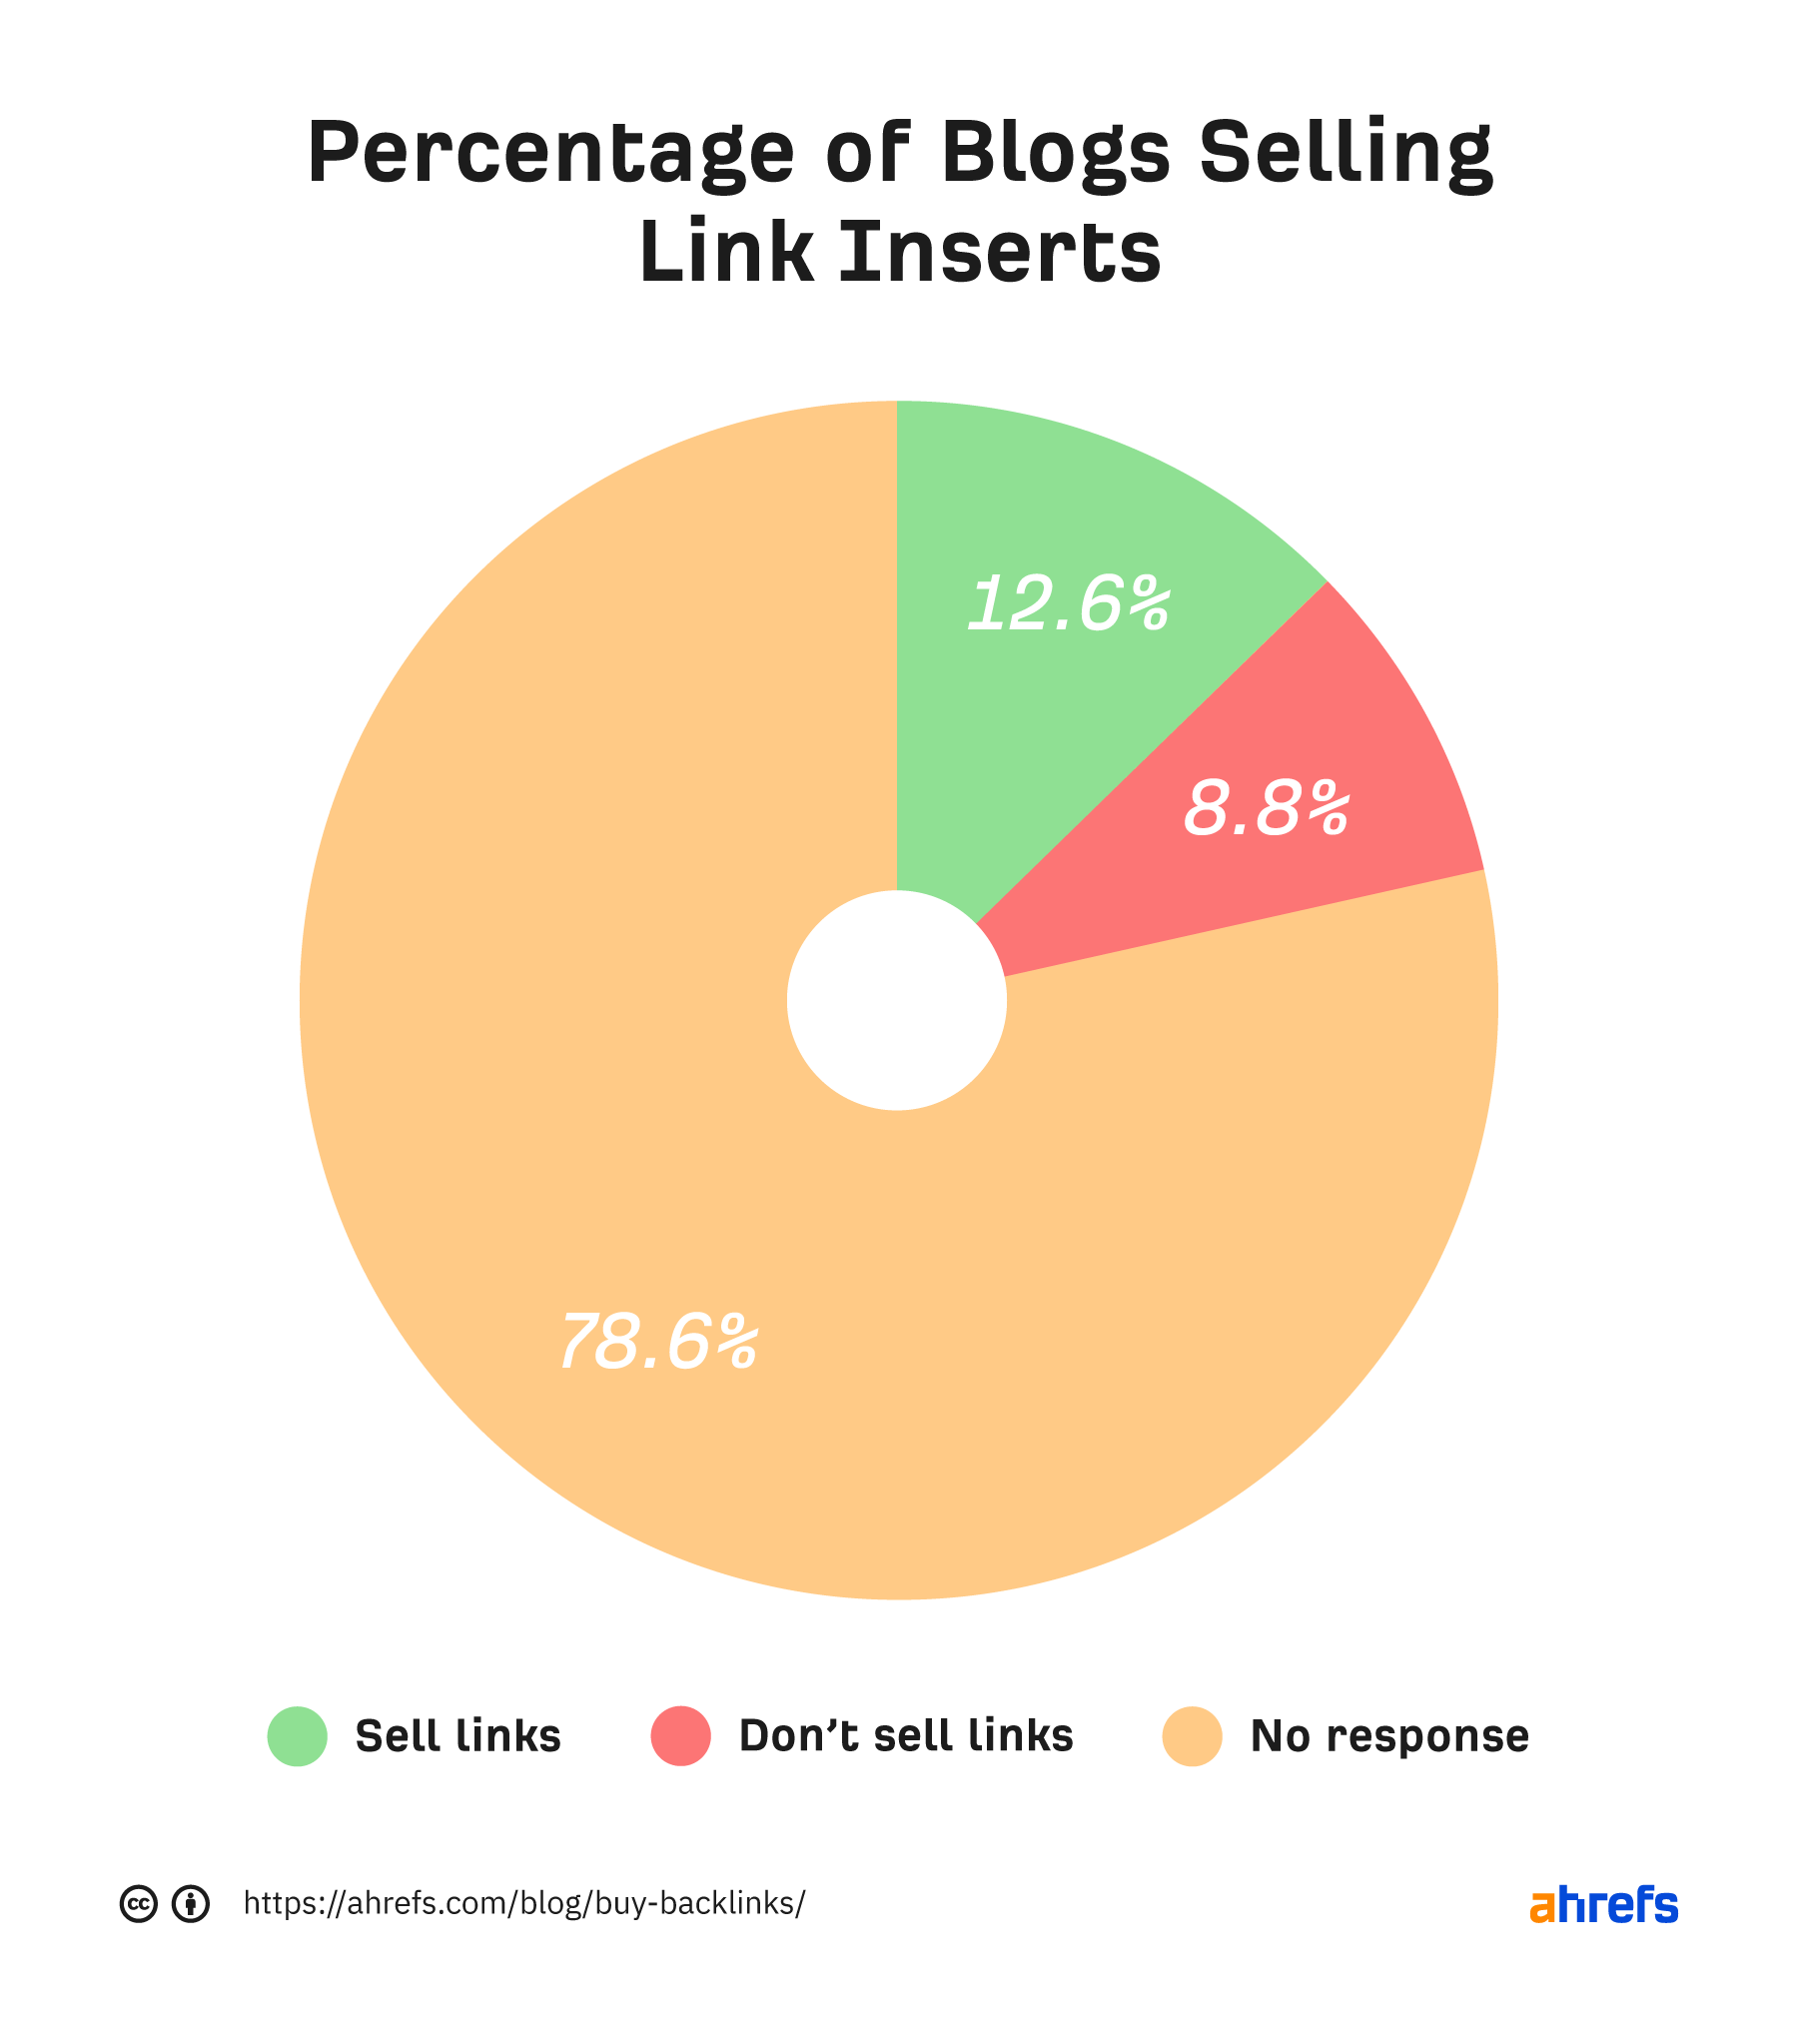 Percentage of blogs selling link inserts